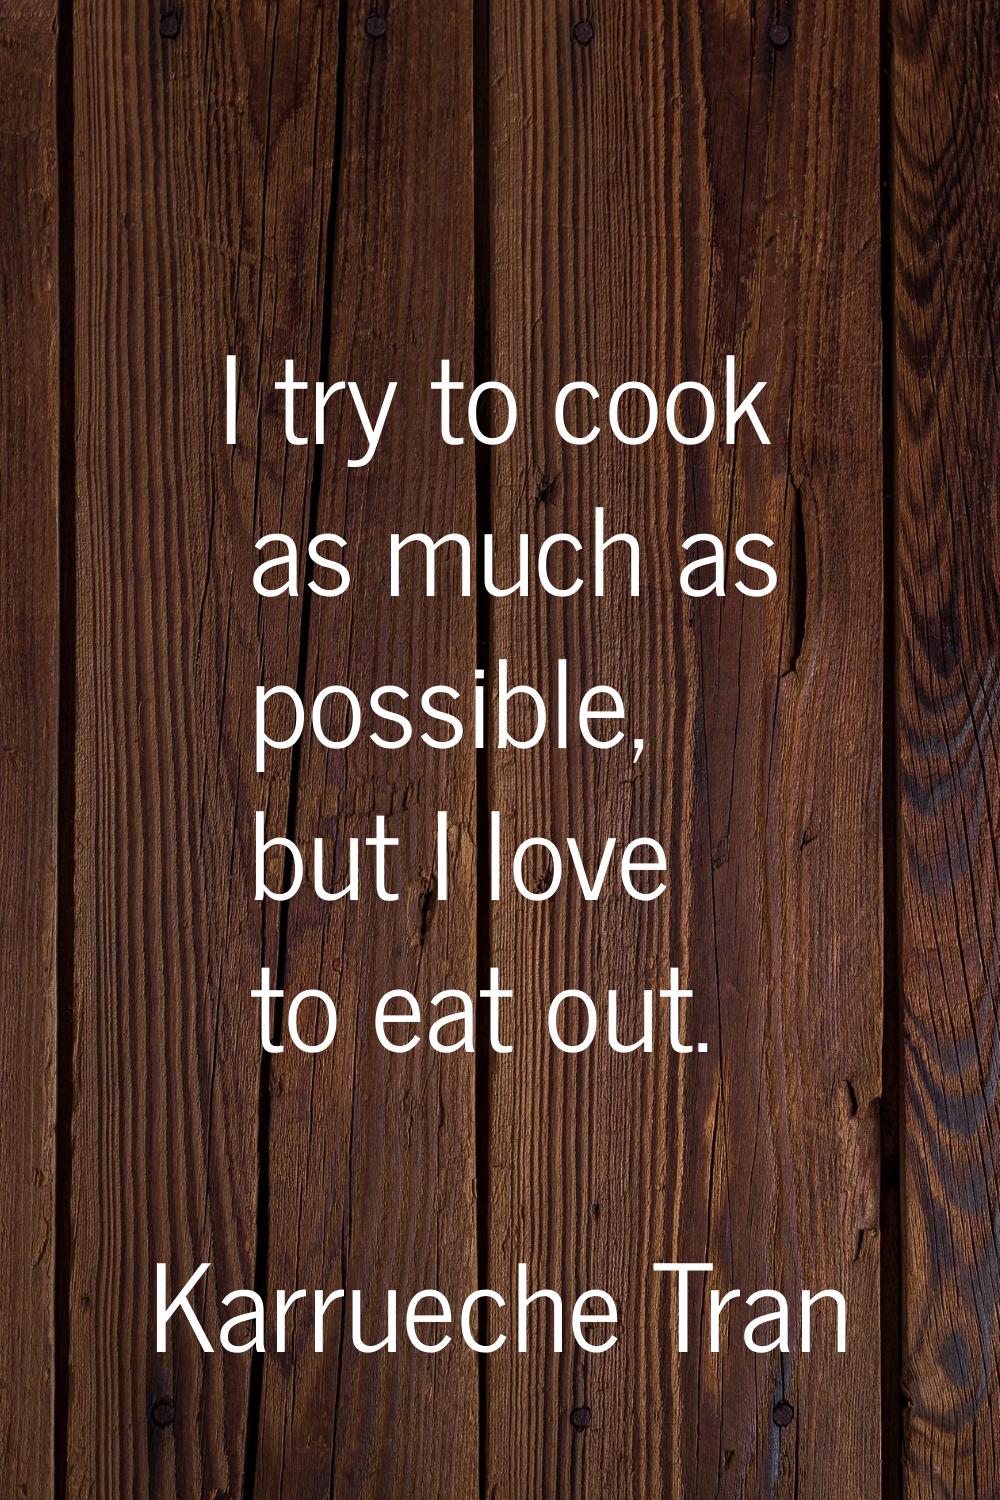 I try to cook as much as possible, but I love to eat out.